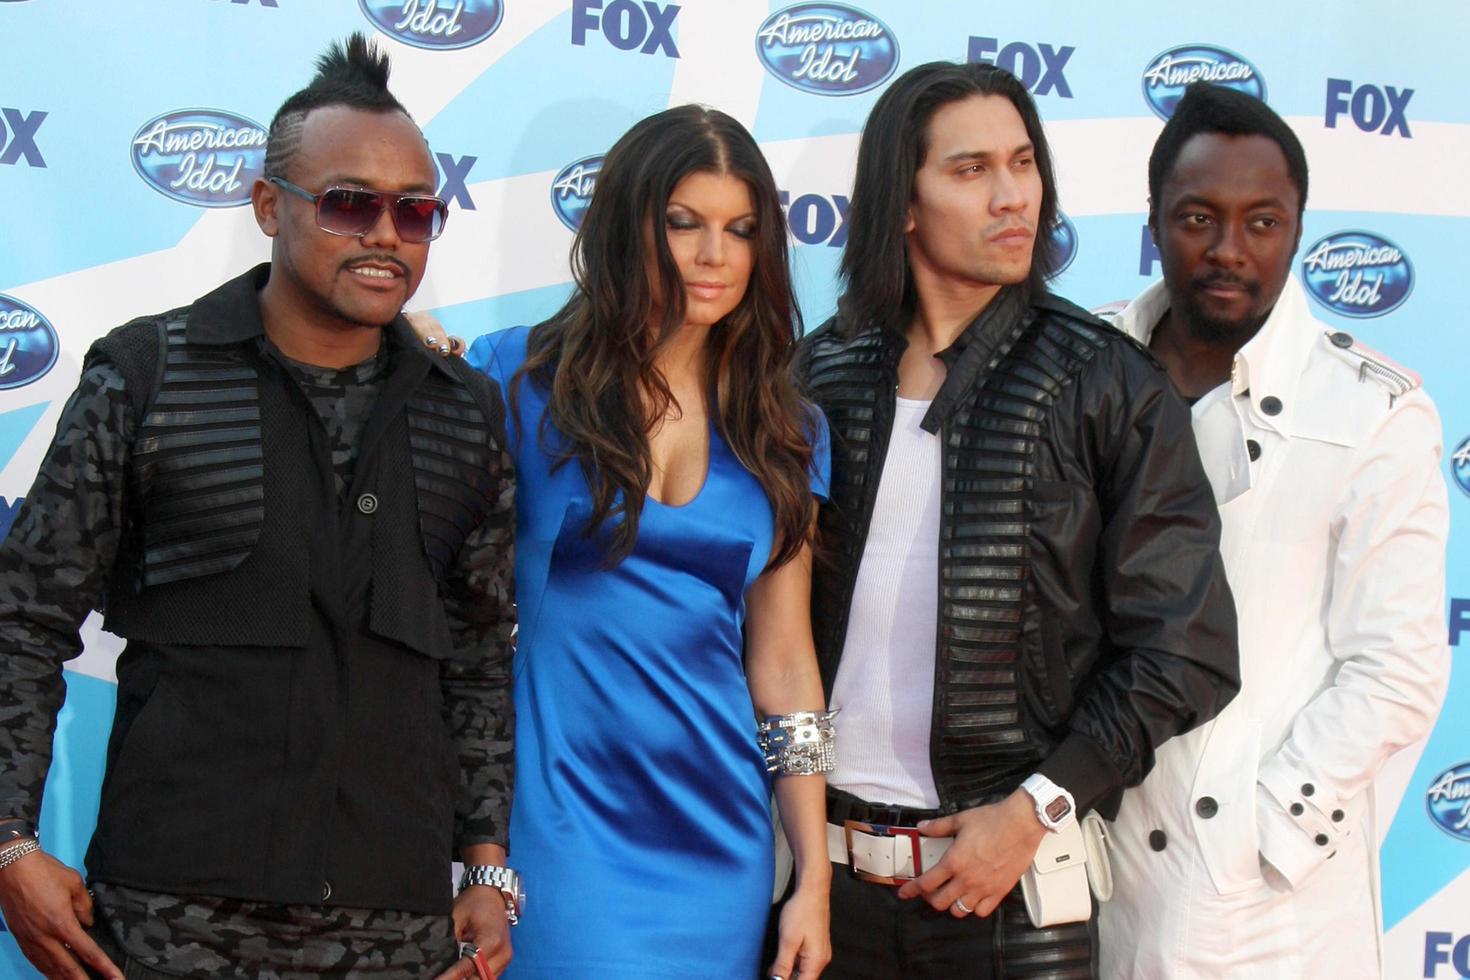 Black Eyed Peas arriving at the Amerian Idol Season 8 Finale at the Nokia Theater in Los Angeles, CA on May 20, 2009 photo